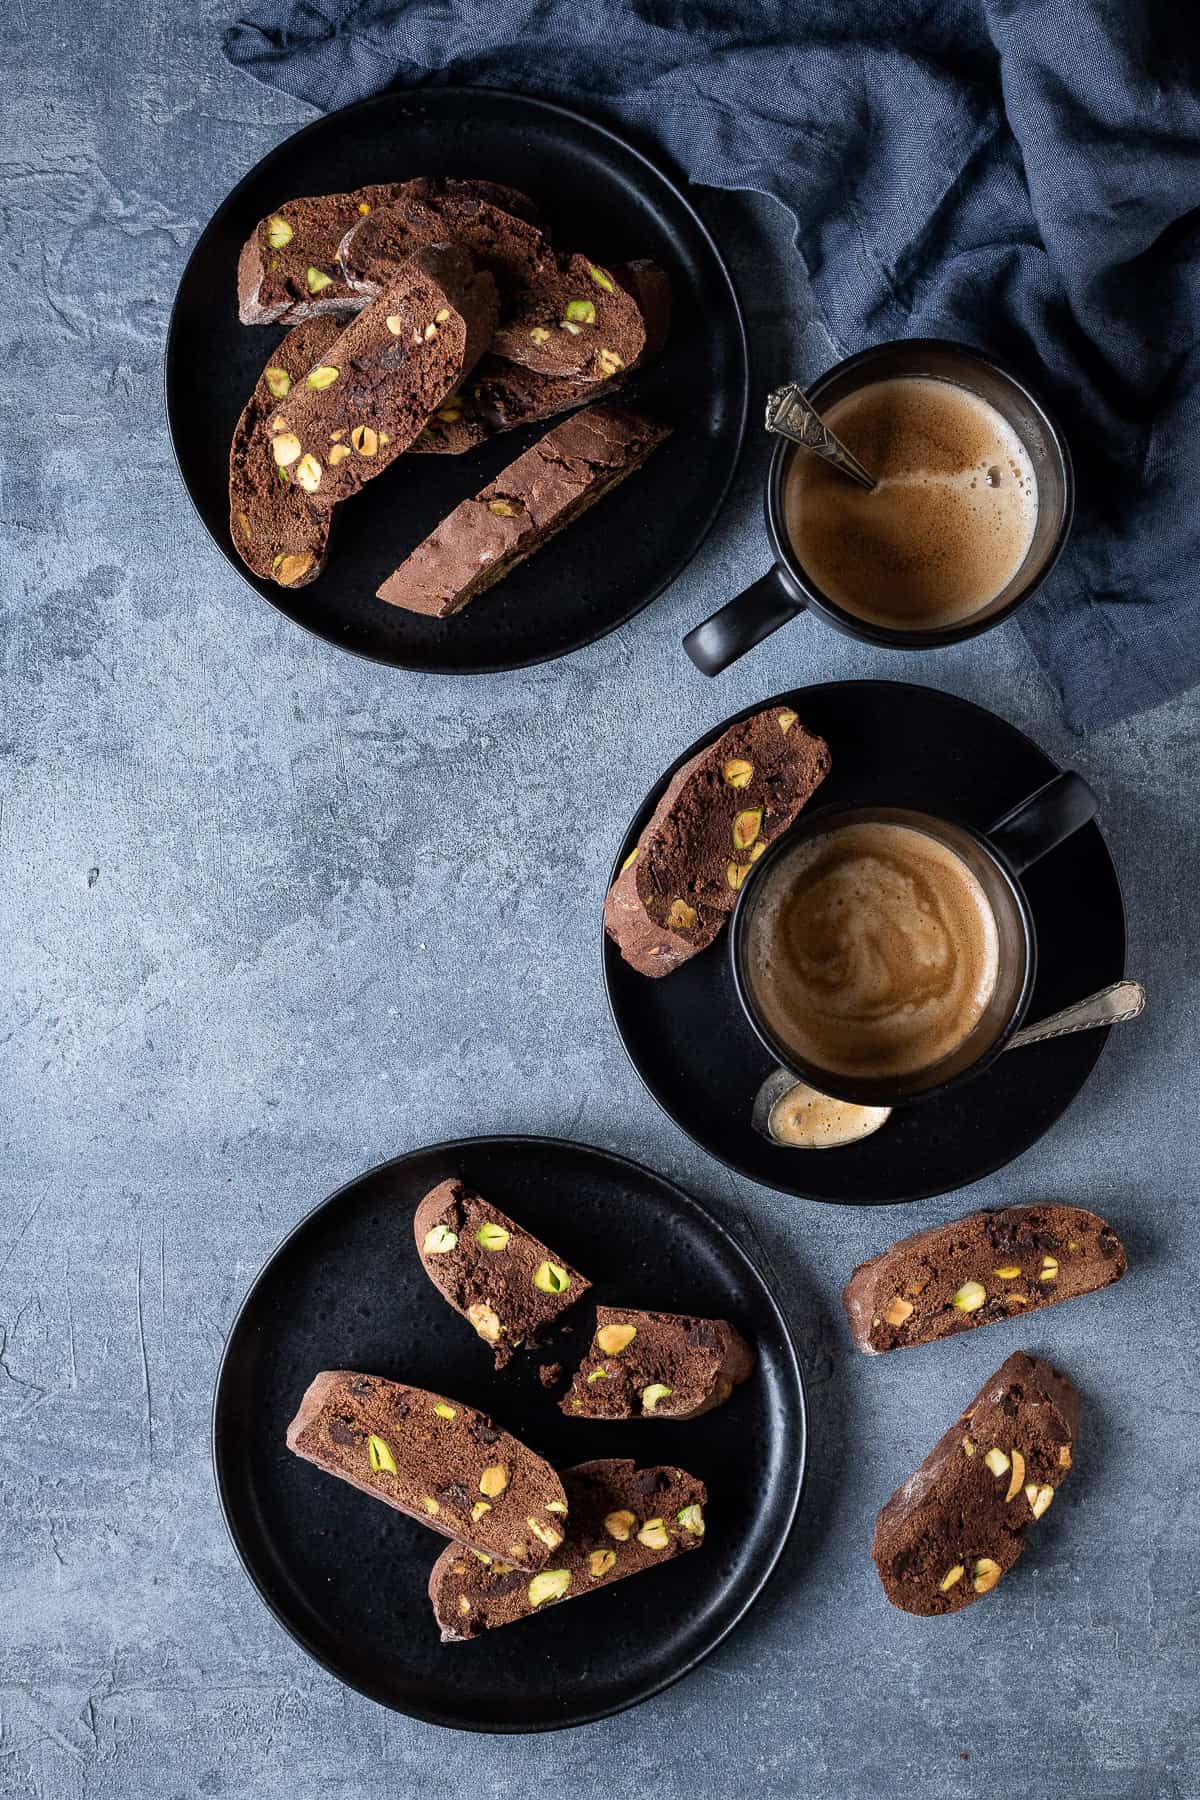 Chocolate pistachio biscotti on black plates with black cups of espresso coffee and a grey cloth.